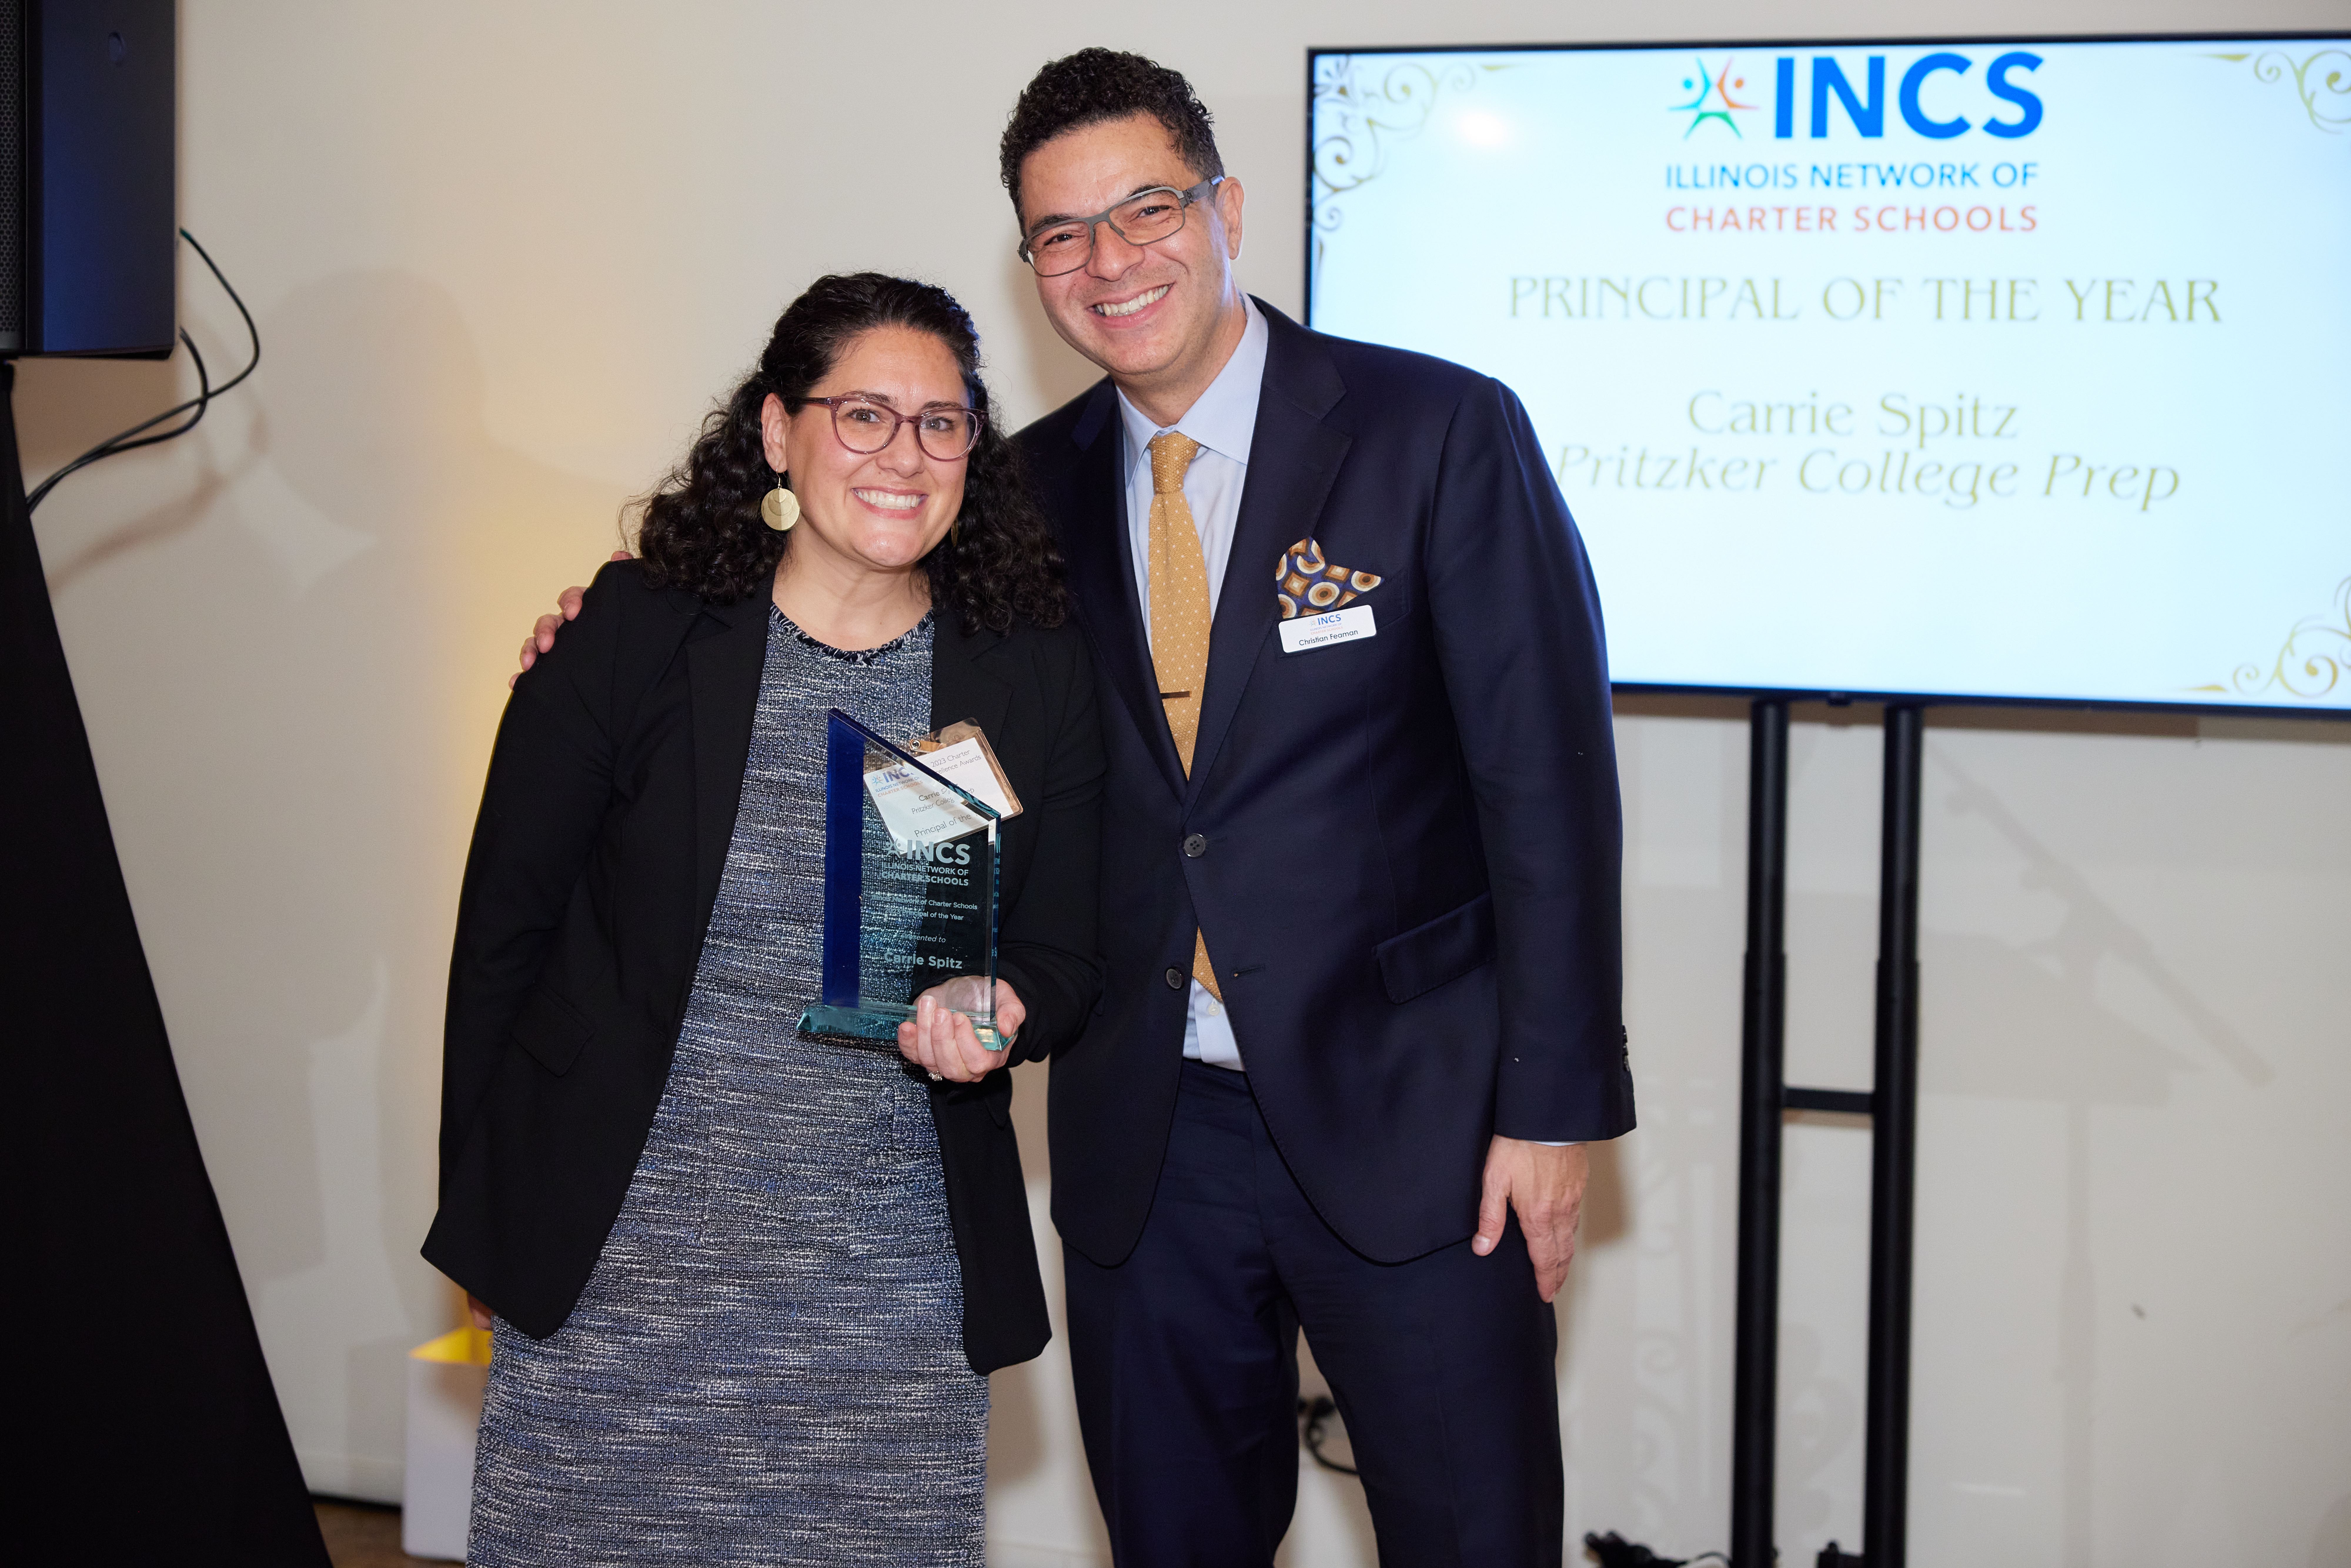 In this photo, Principal Carrie Spitz of Pritzker College Prep is receiving her award from hristian Feaman, the director of district advocacy at INCS.